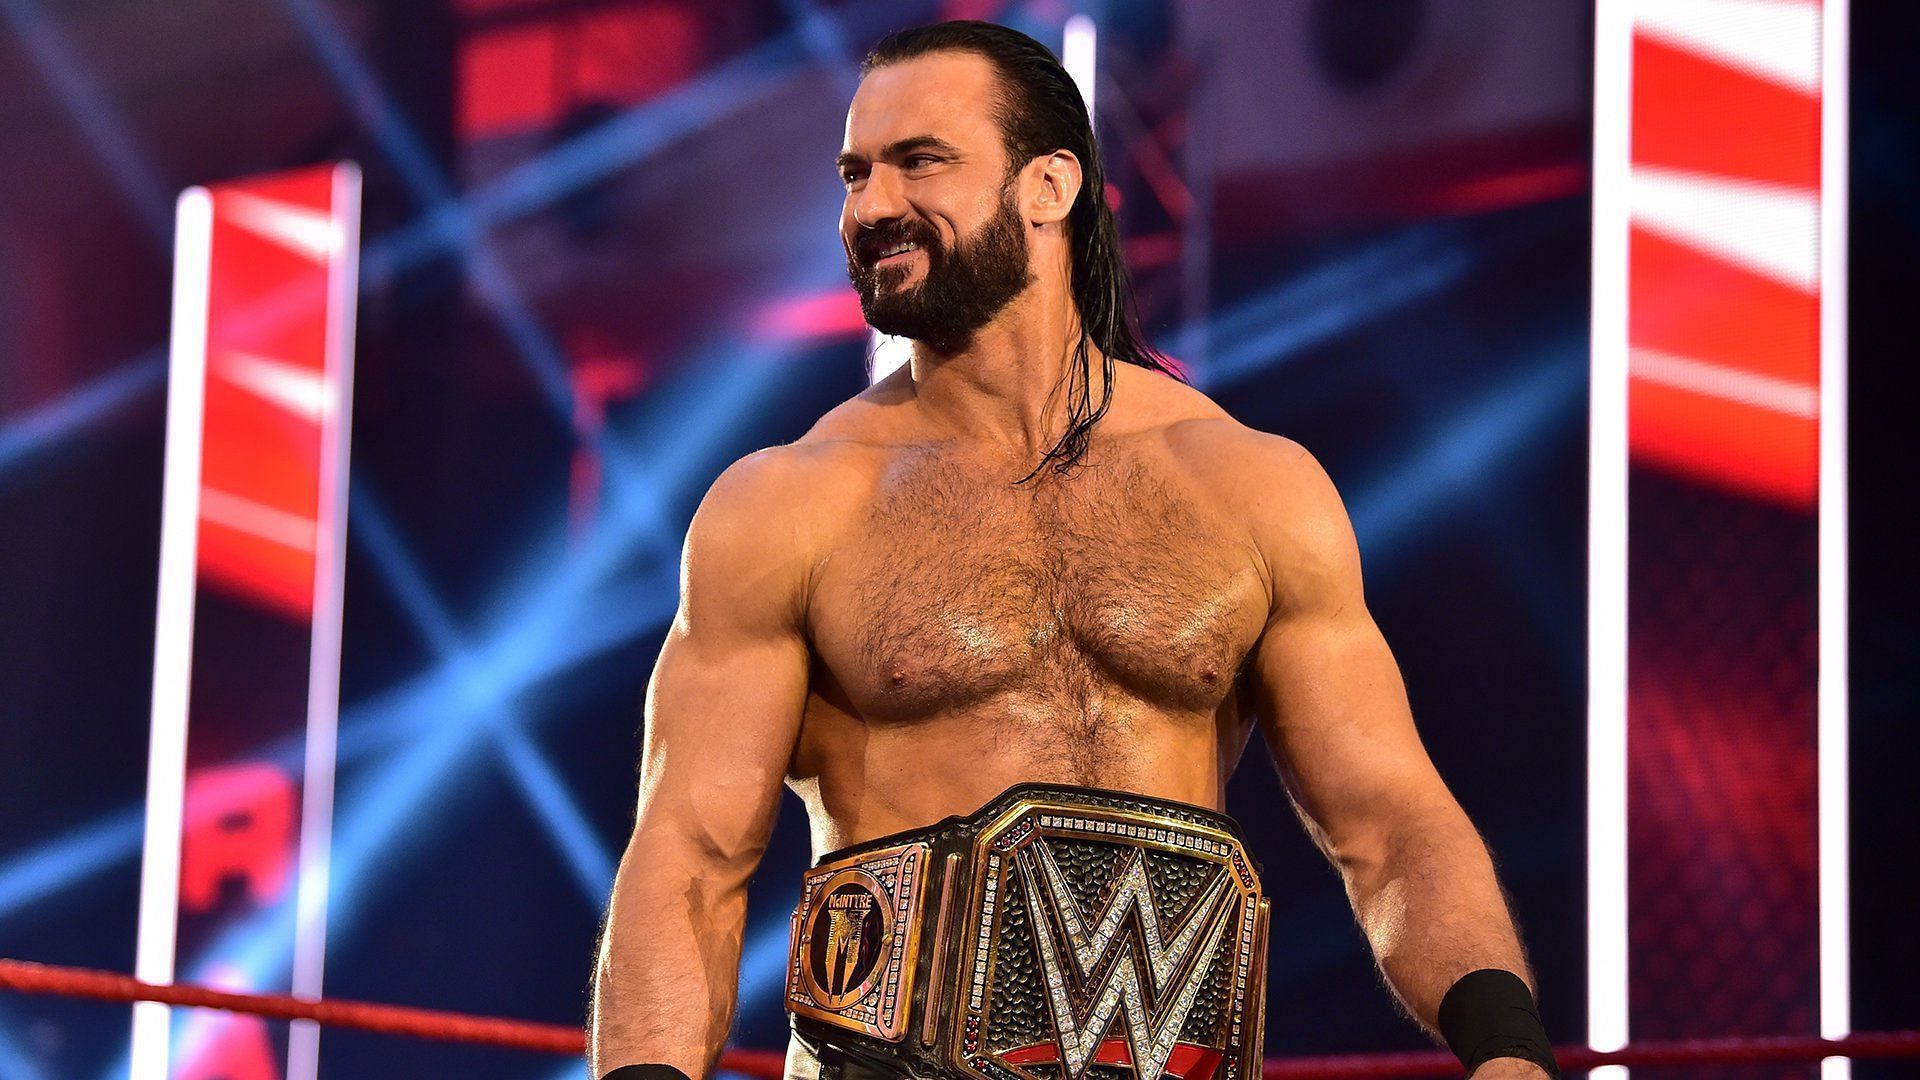 Drew McIntyre will team up with RK-Bro at WrestleMania Backlash